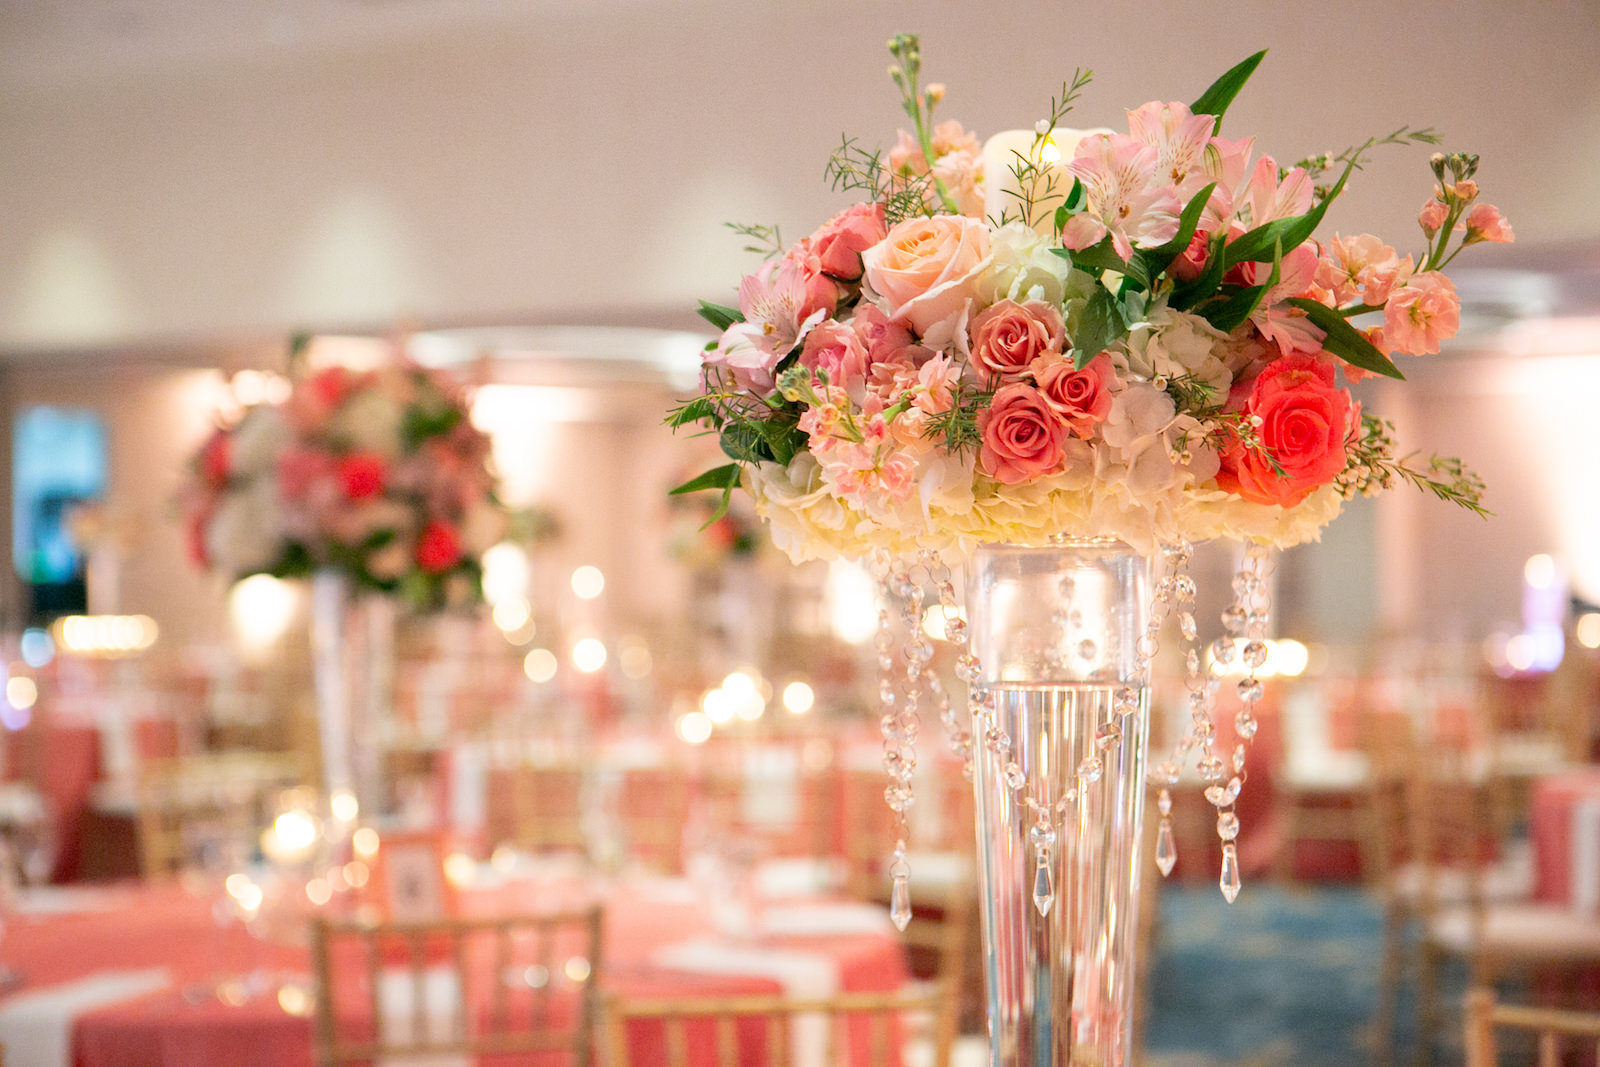 Tampa Clearwater Beach Indian Wedding at Hilton Clearwater Beach Wedding Venue | Ballroom Hotel Wedding Reception Tables with Gold Chiavari Chairs and Coral Pink Table Cloth Linens and White Napkins | Tall Floral Centerpieces with Pink Peach Coral Roses and White Hydrangea surrounded by Floating Candles